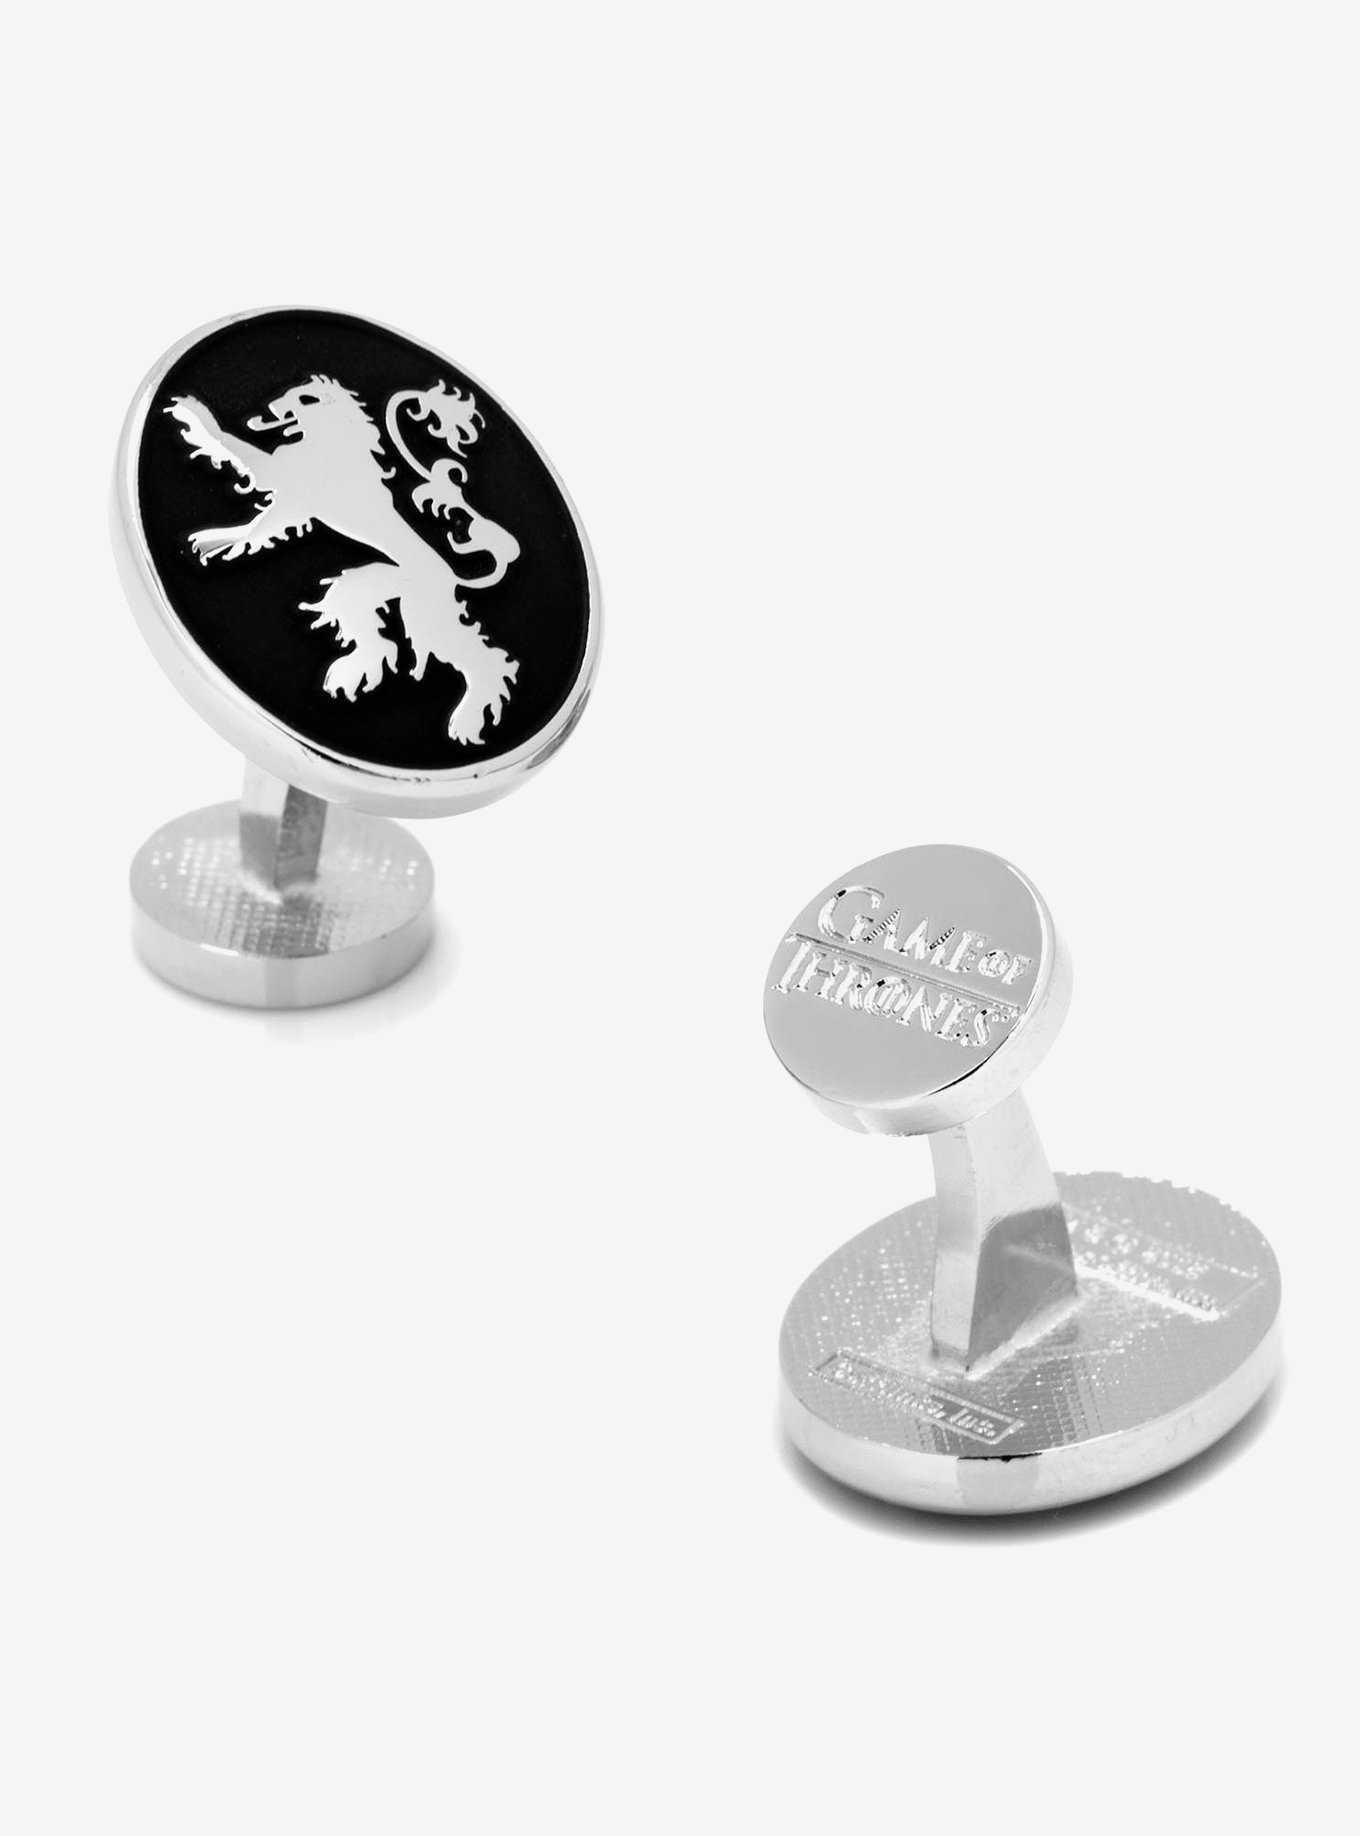 Game Of Thrones House Lannister Cufflinks, , hi-res